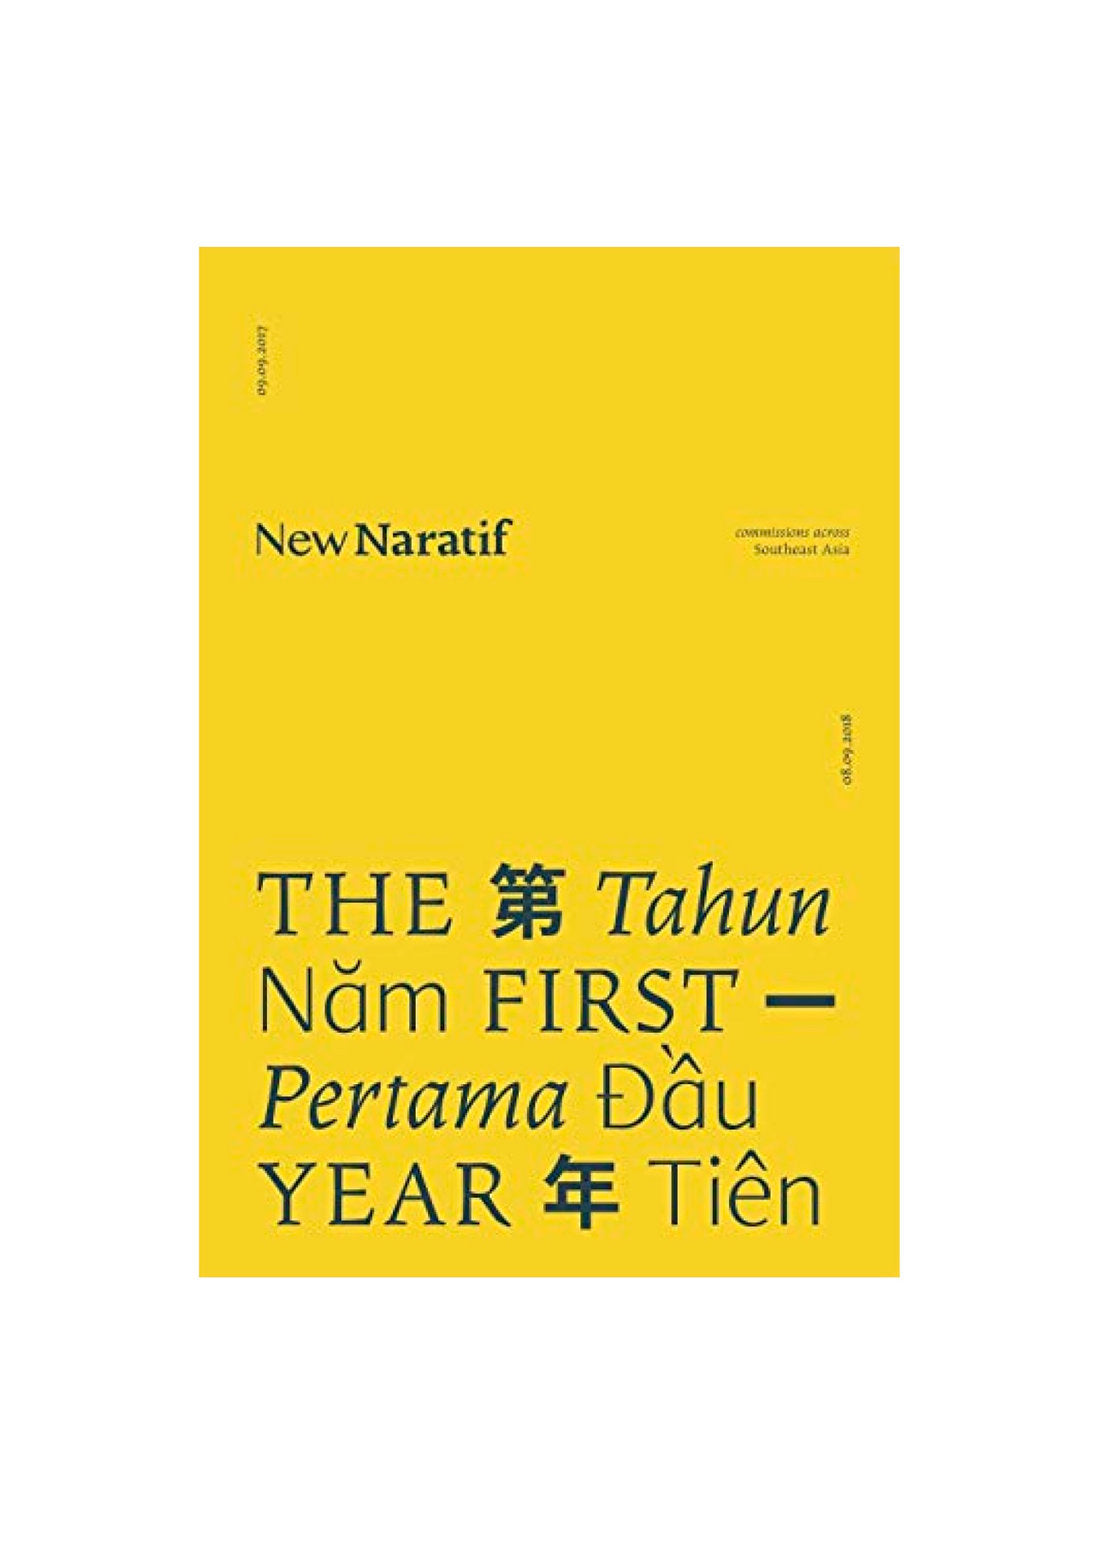 New Naratif: The First Year